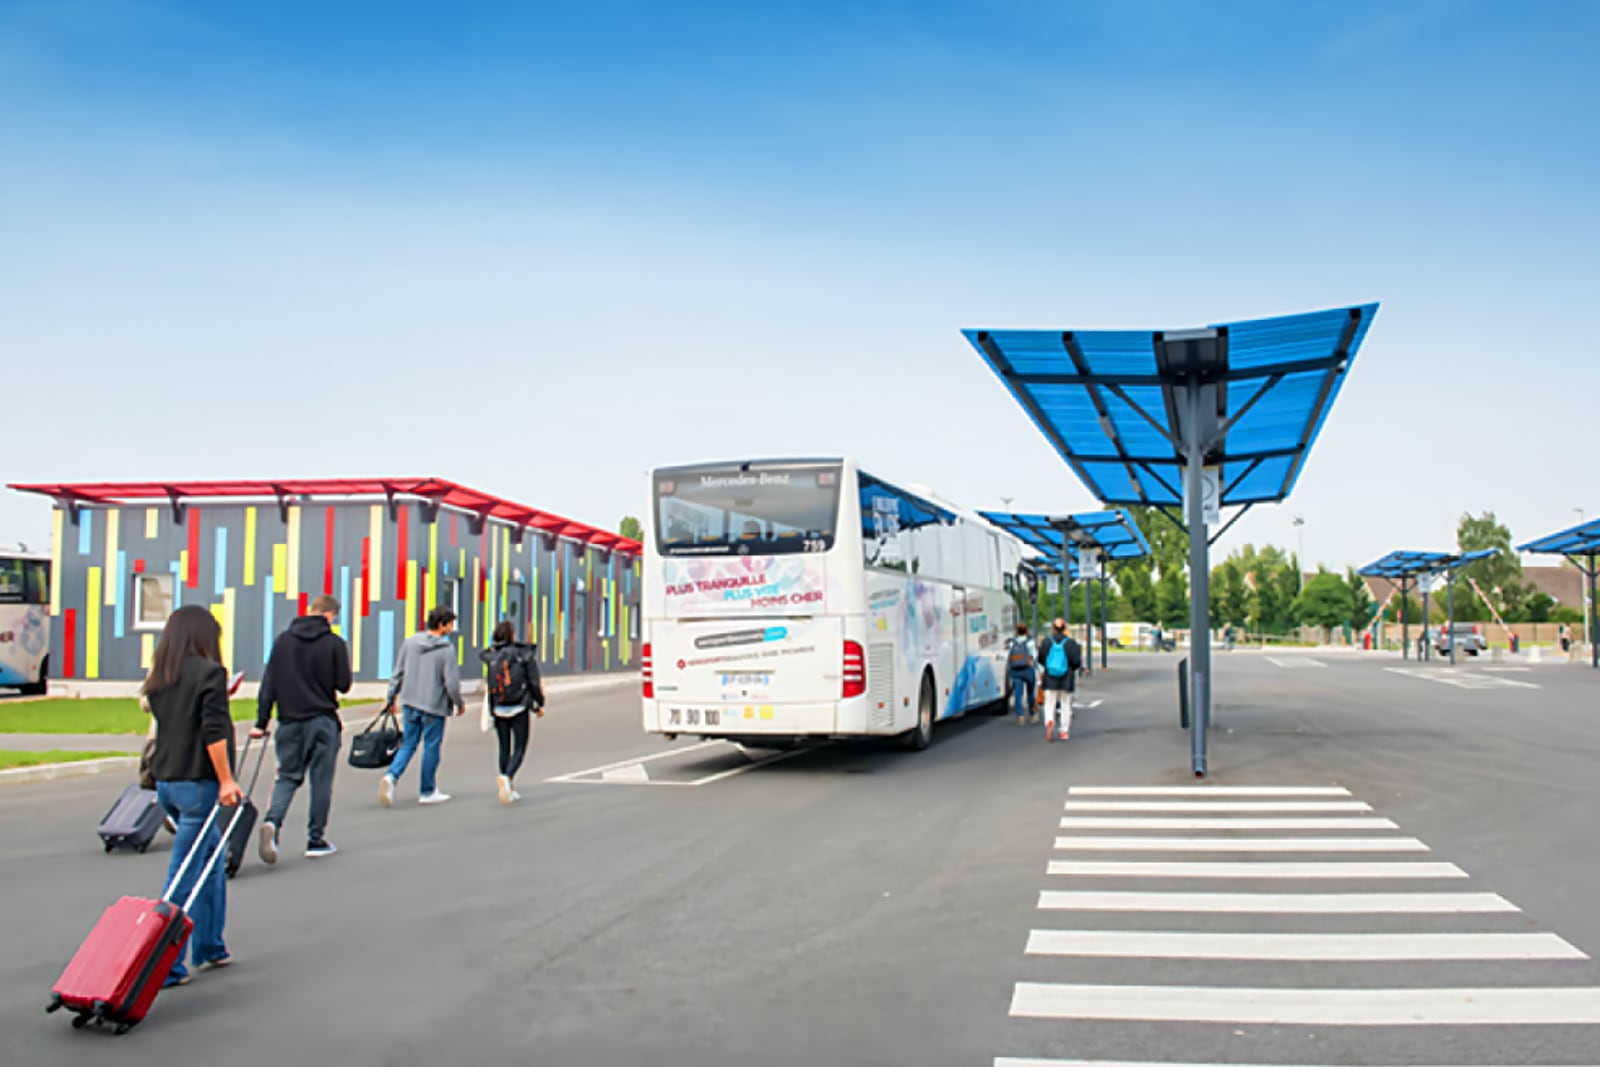 View of the BVA bus station connecting Paris